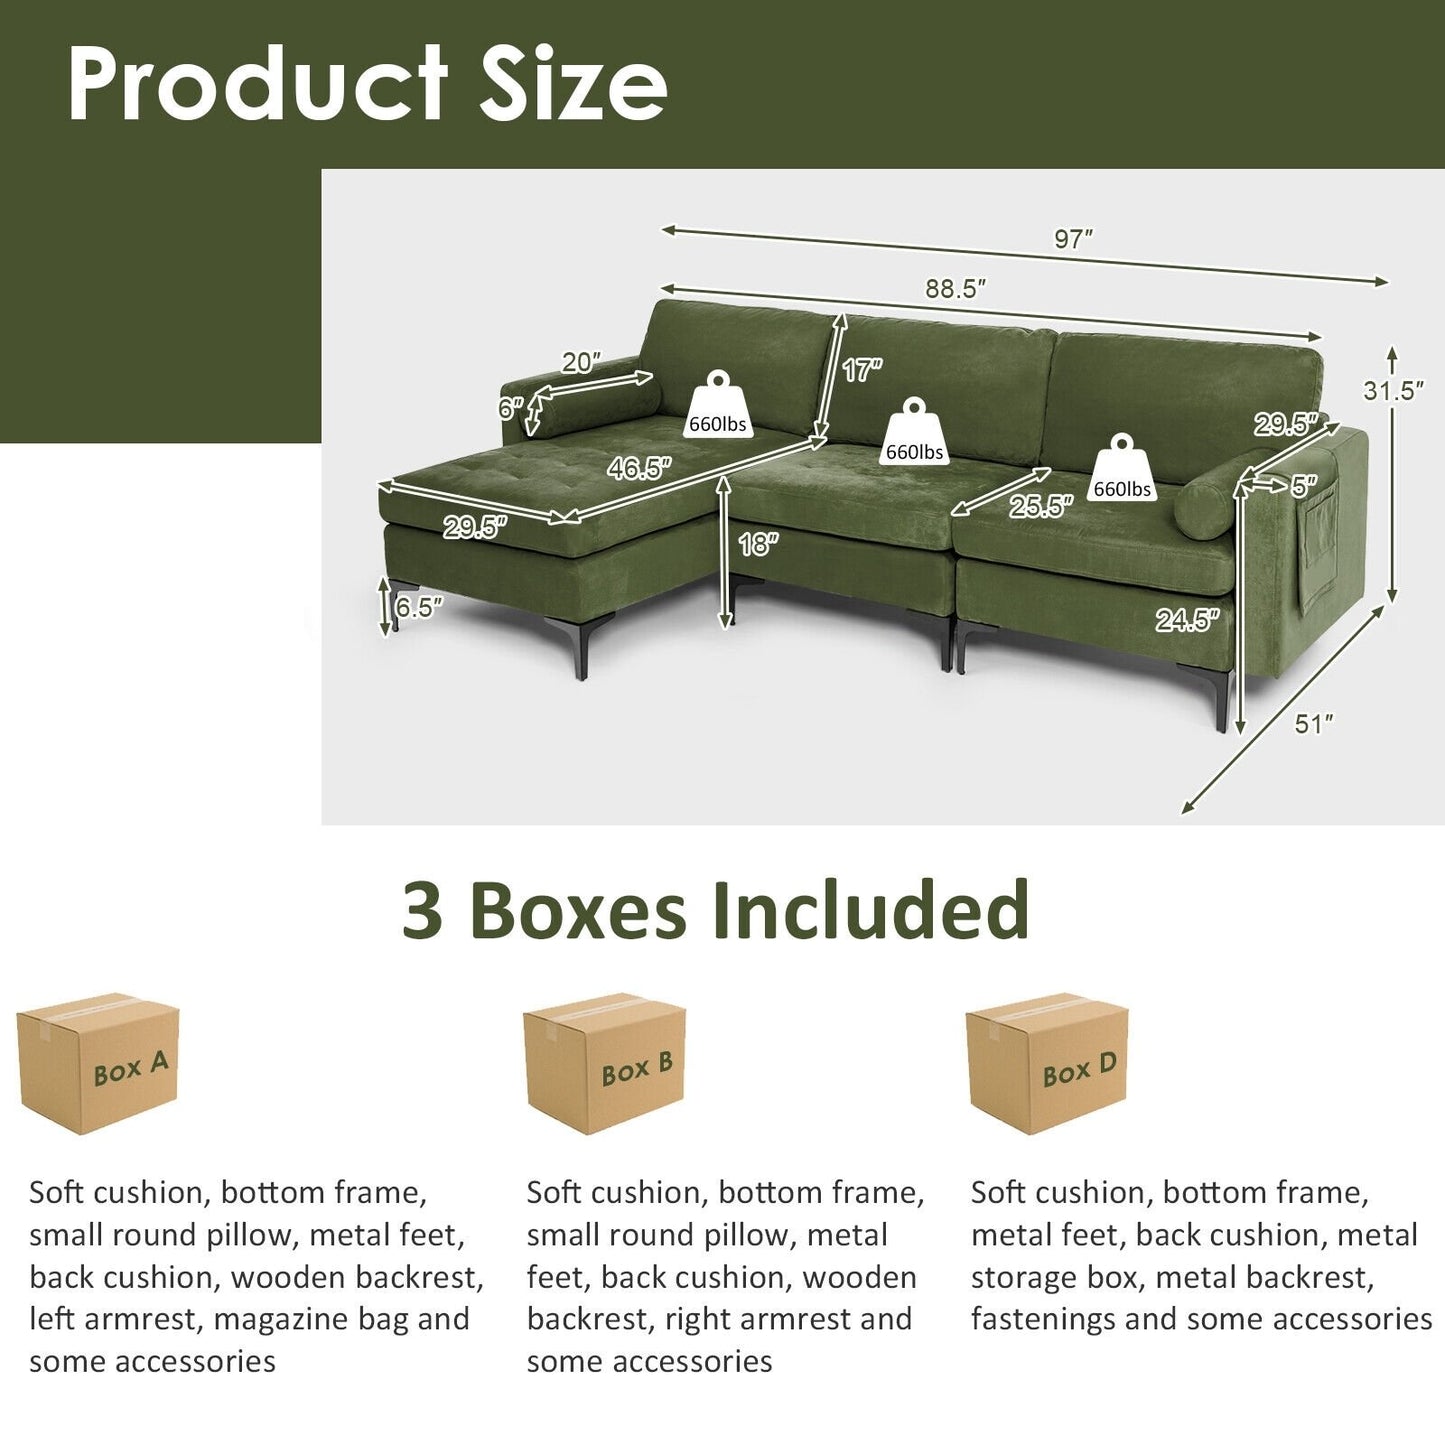 Modular 2-seat/3-Seat/4-Seat L-shaped Sectional Sofa Couch with Reversible Chaise and Socket USB Ports-3-Seat L-shaped, Army Green